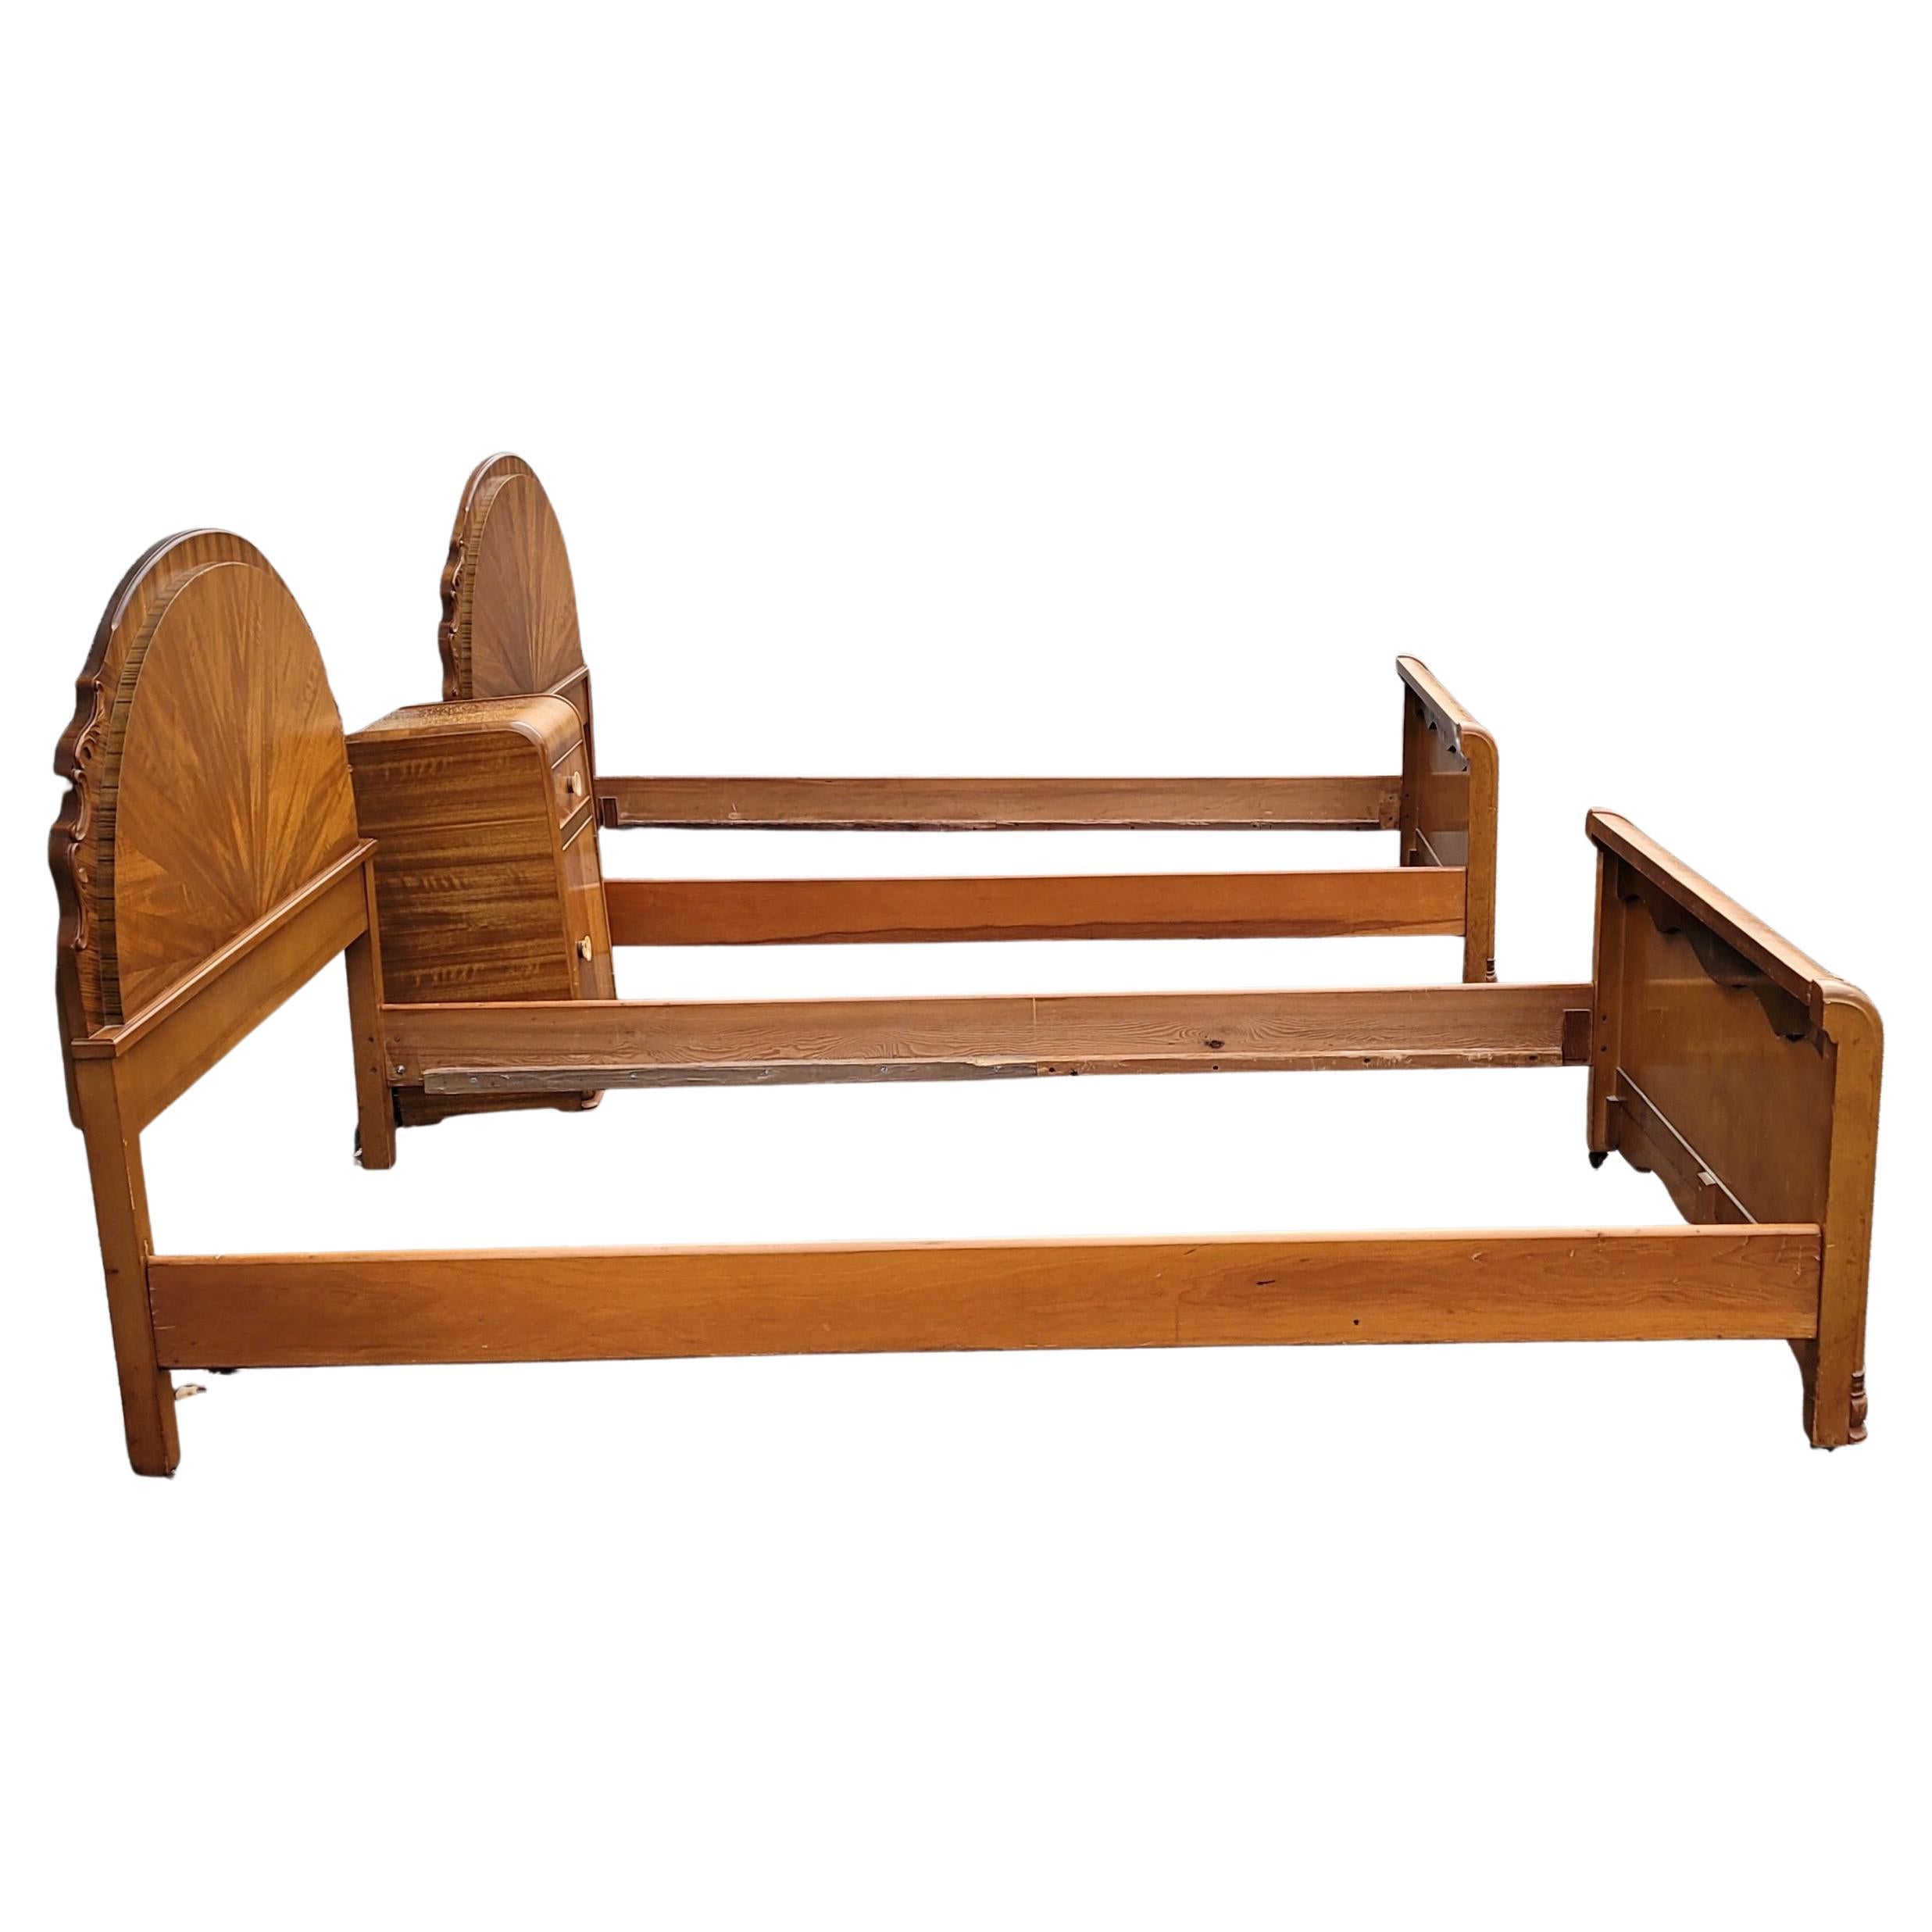 A Pair of 1930s Art Deco Mahogany Twin Size Bedsteads im Angebot 3